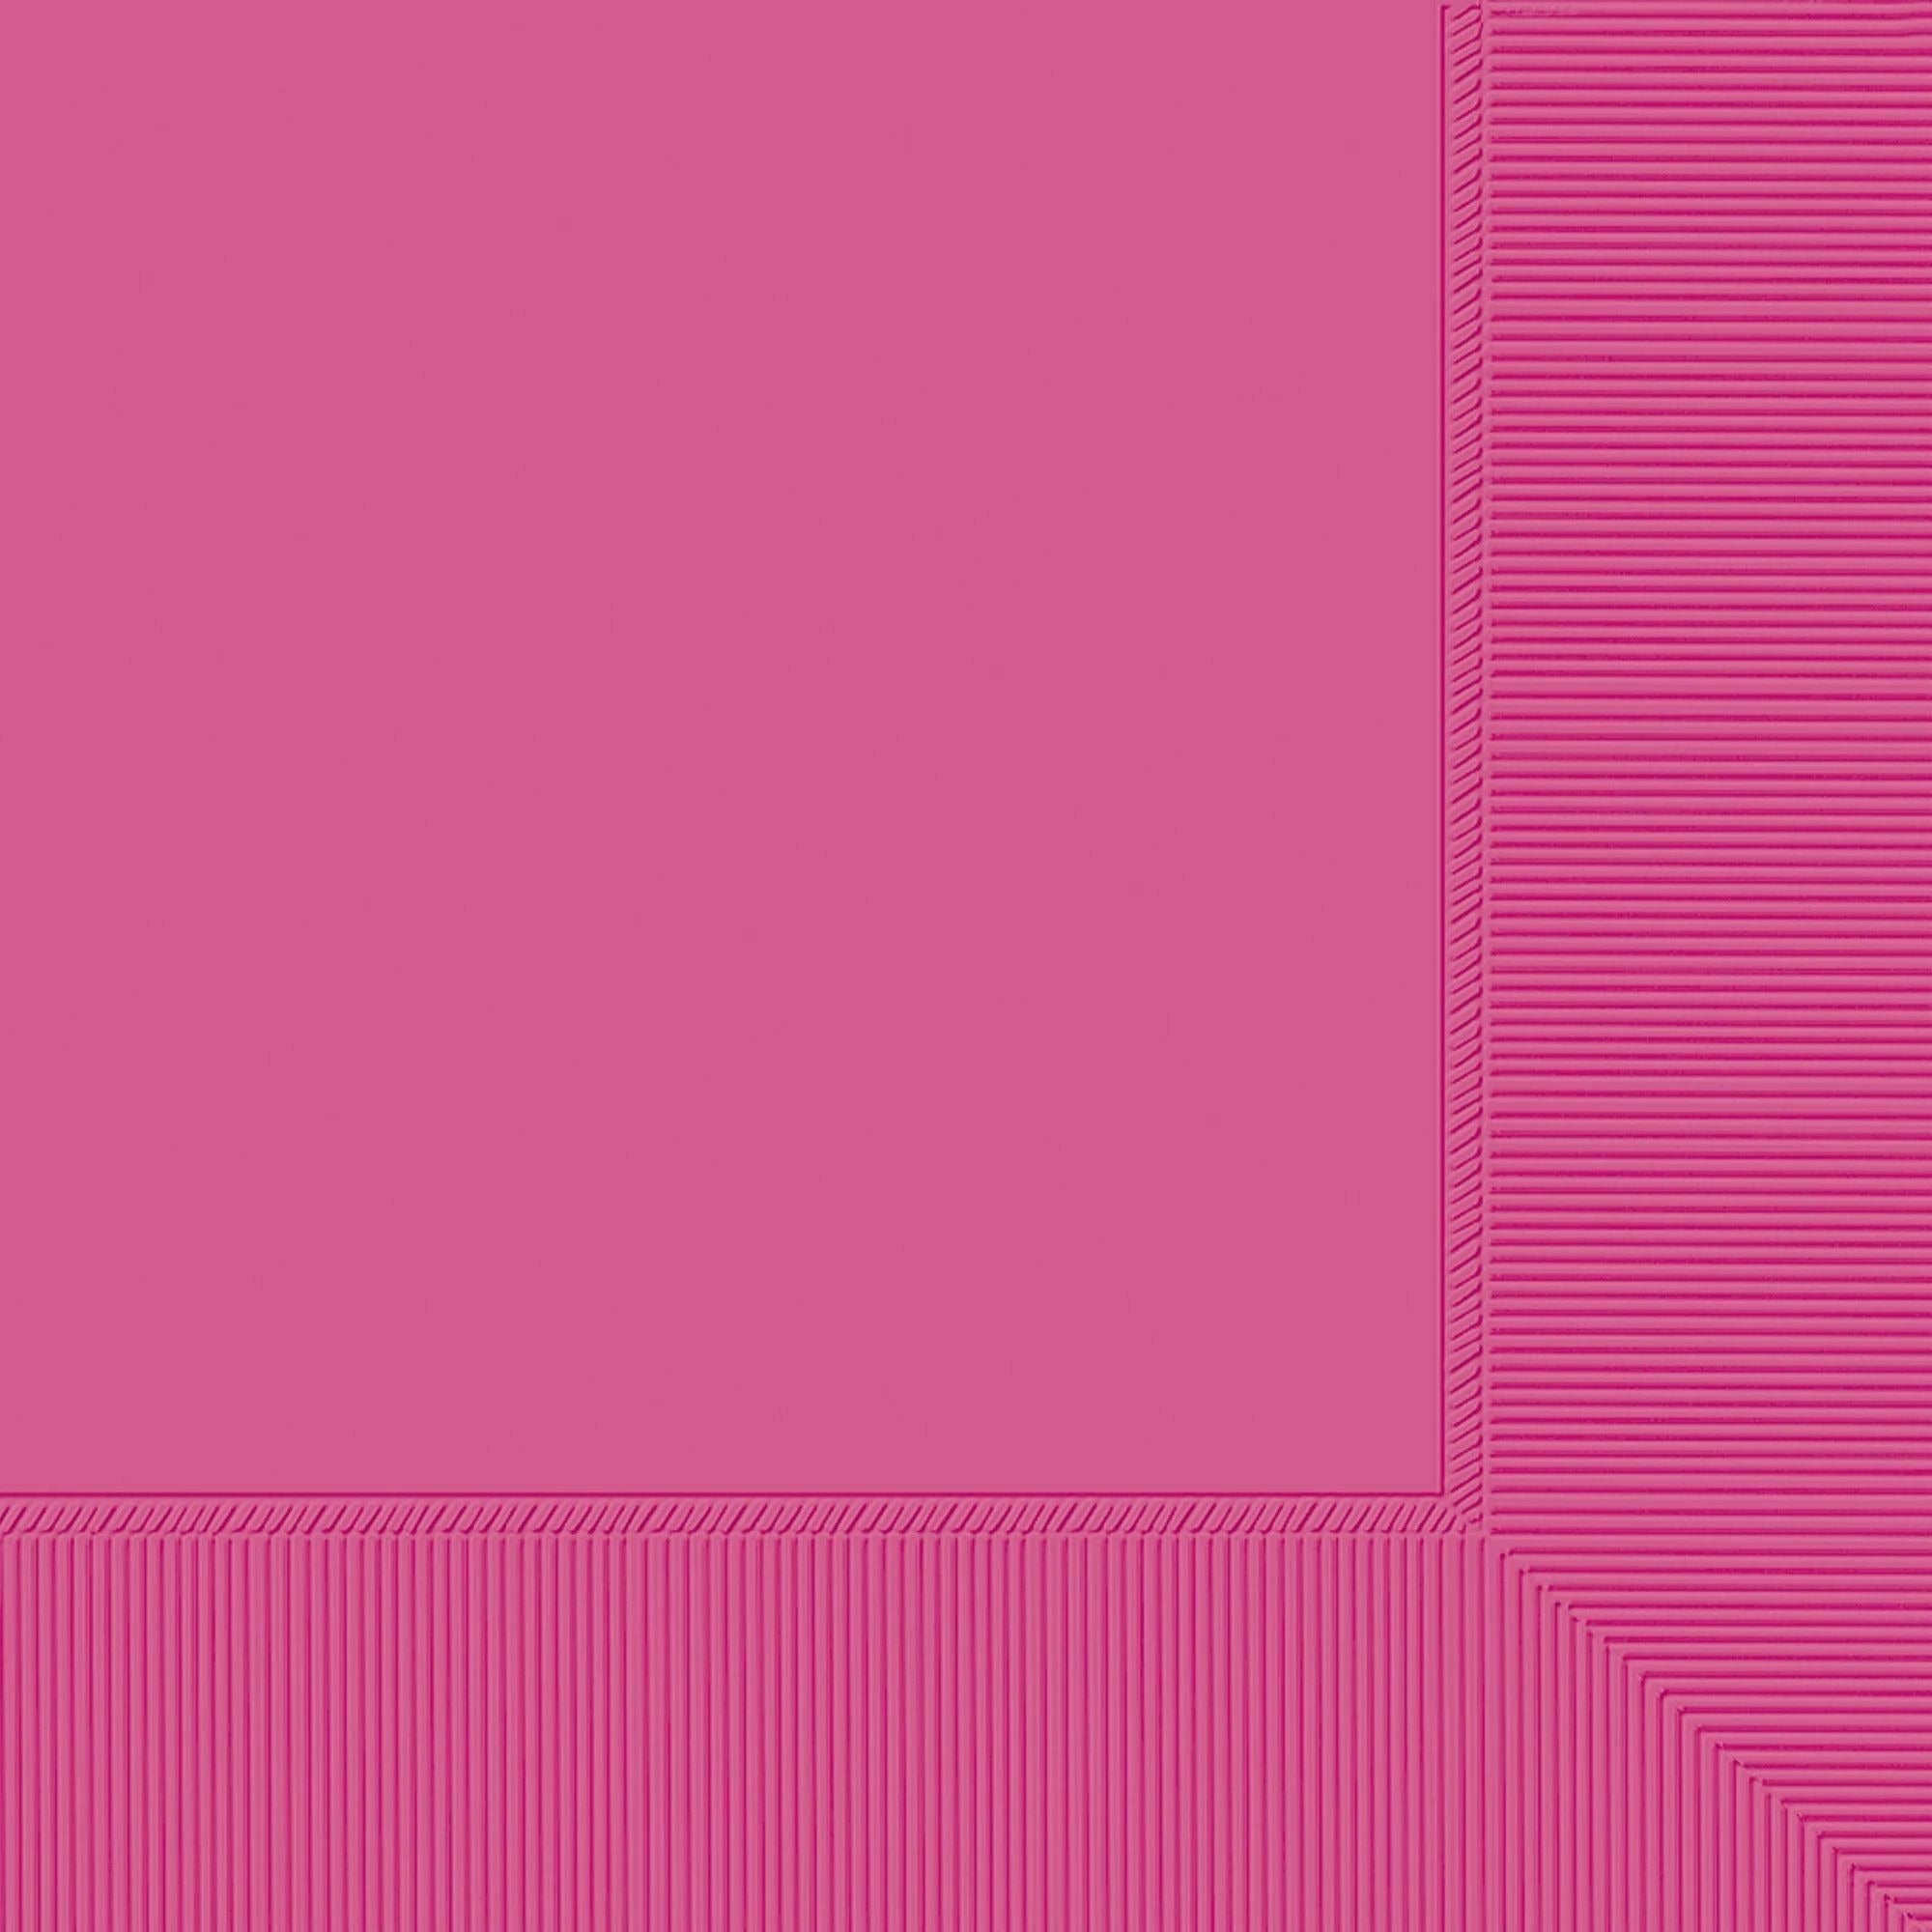 Amscan BASIC Bright Pink - Luncheon Napkins, 100 Ct.